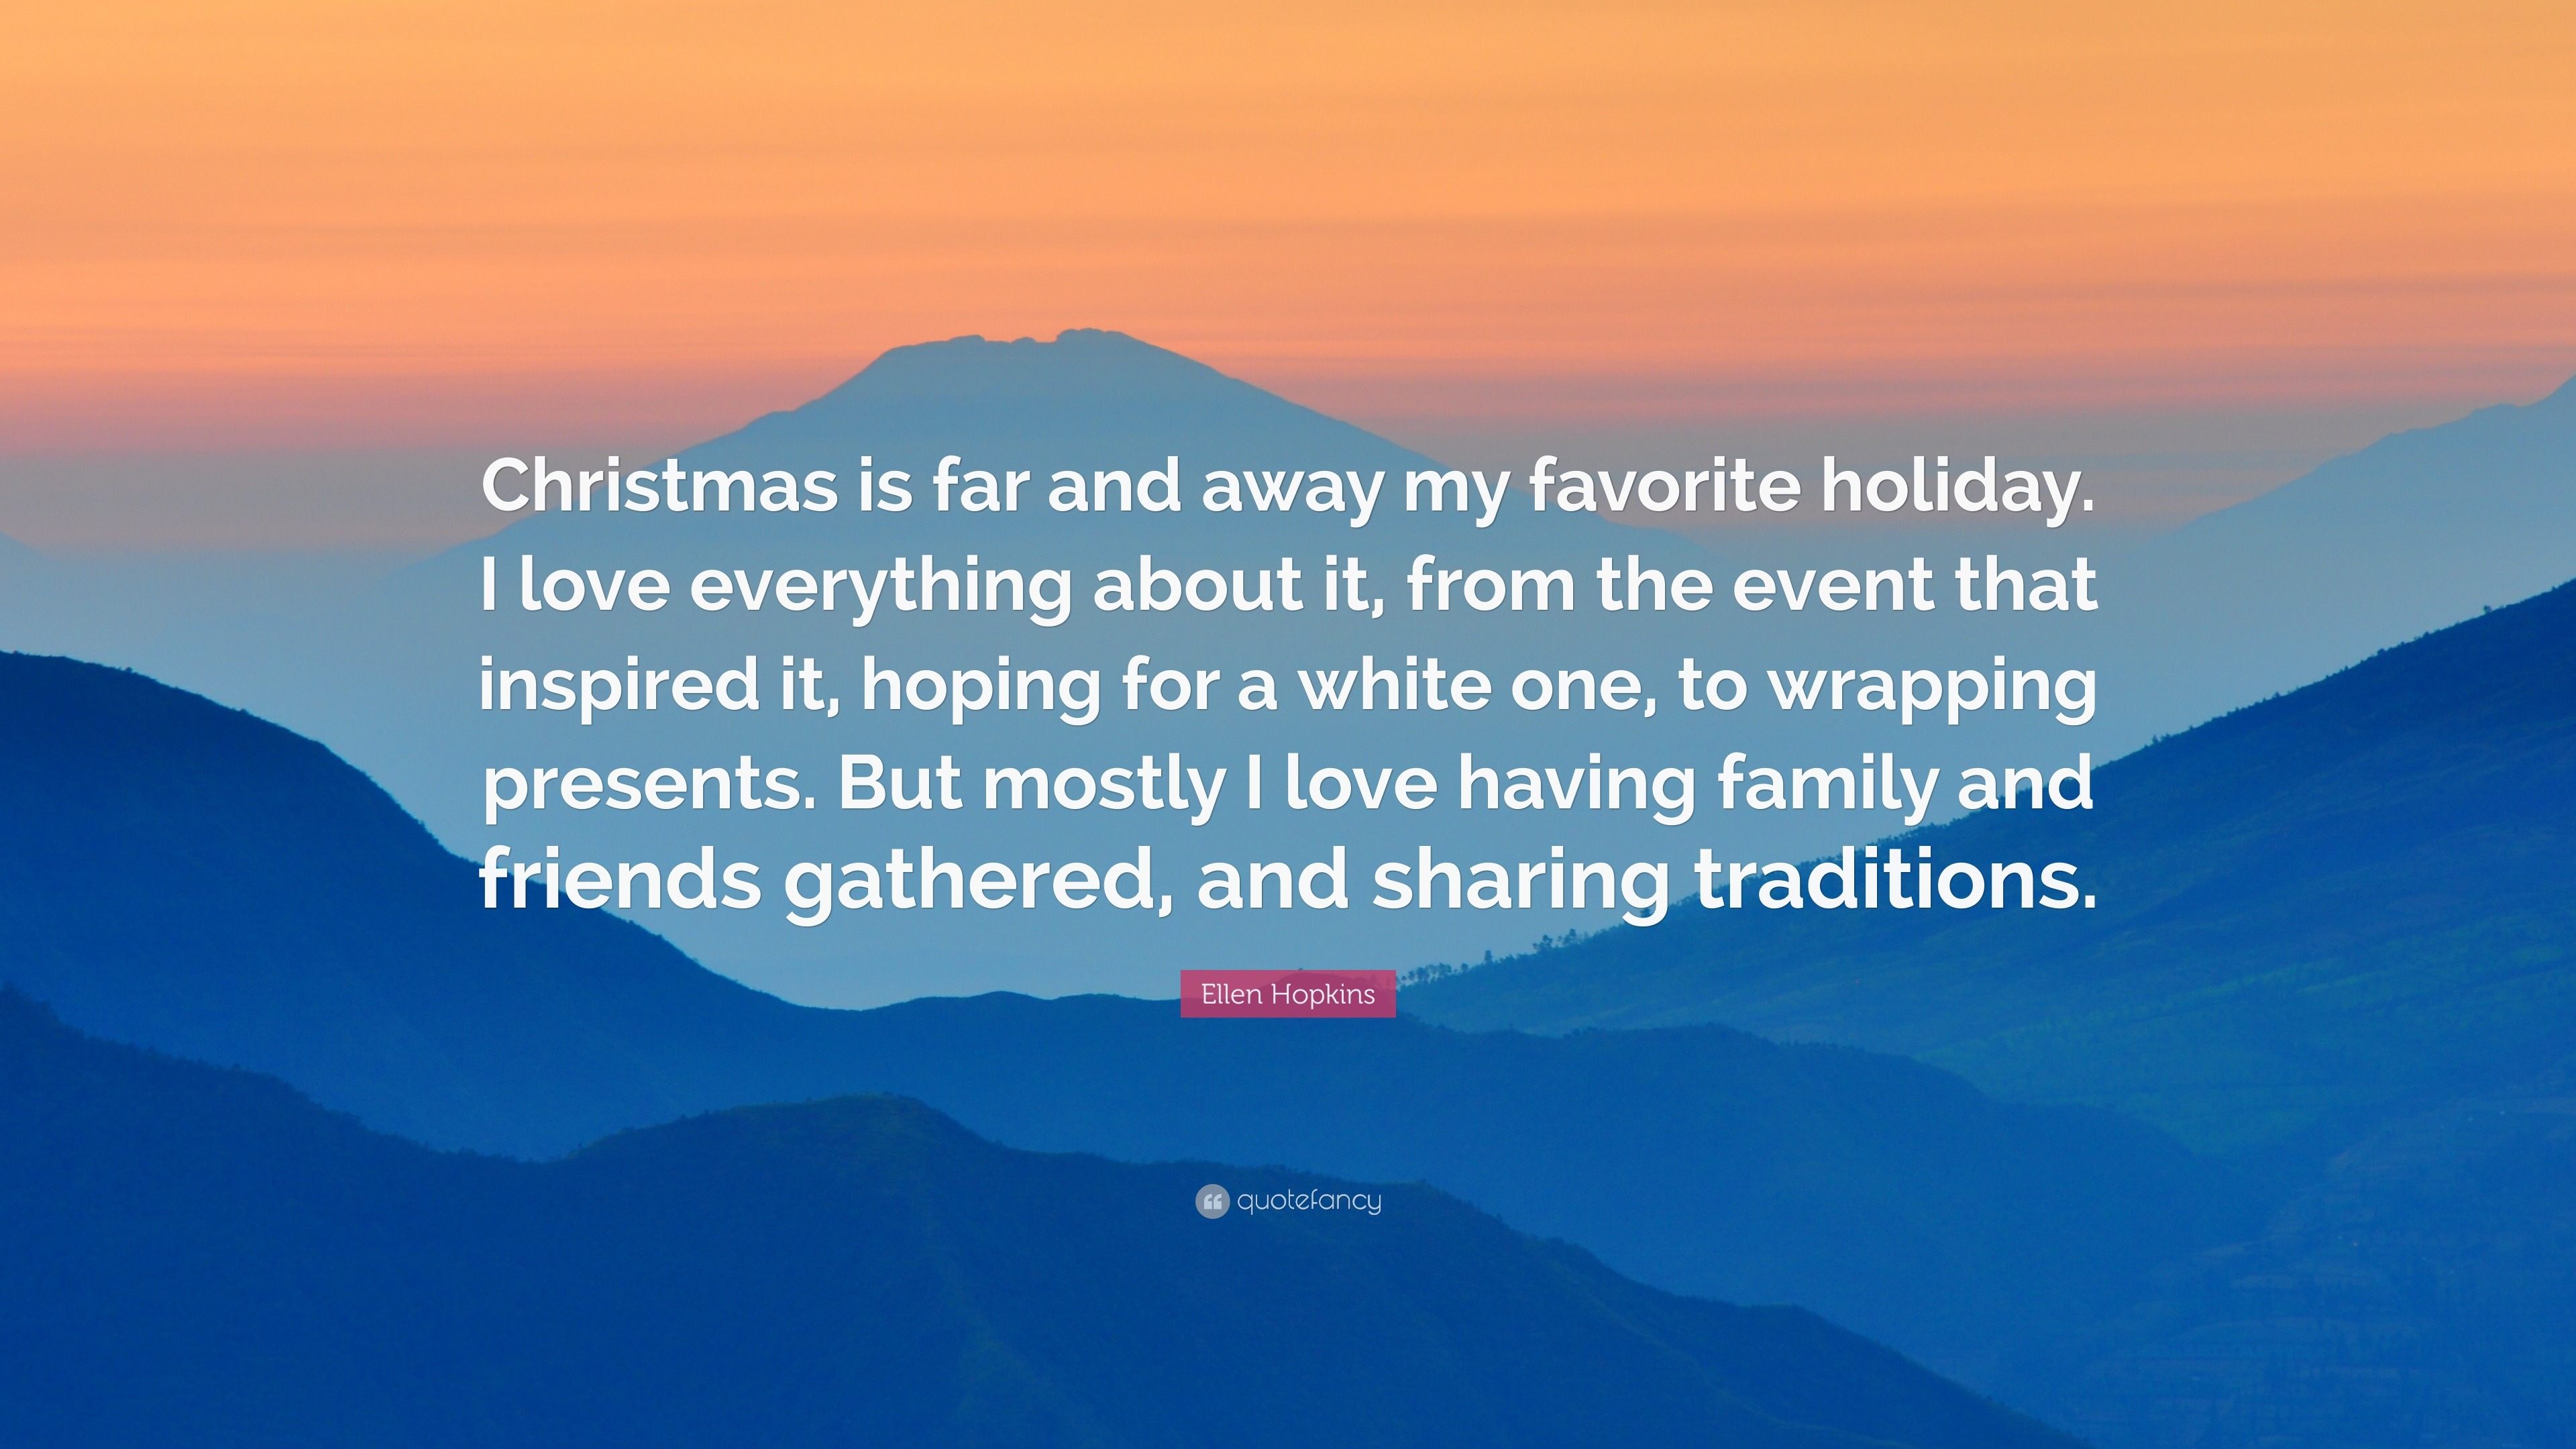 Ellen Hopkins Quote: “Christmas is far and away my favorite holiday. I ...